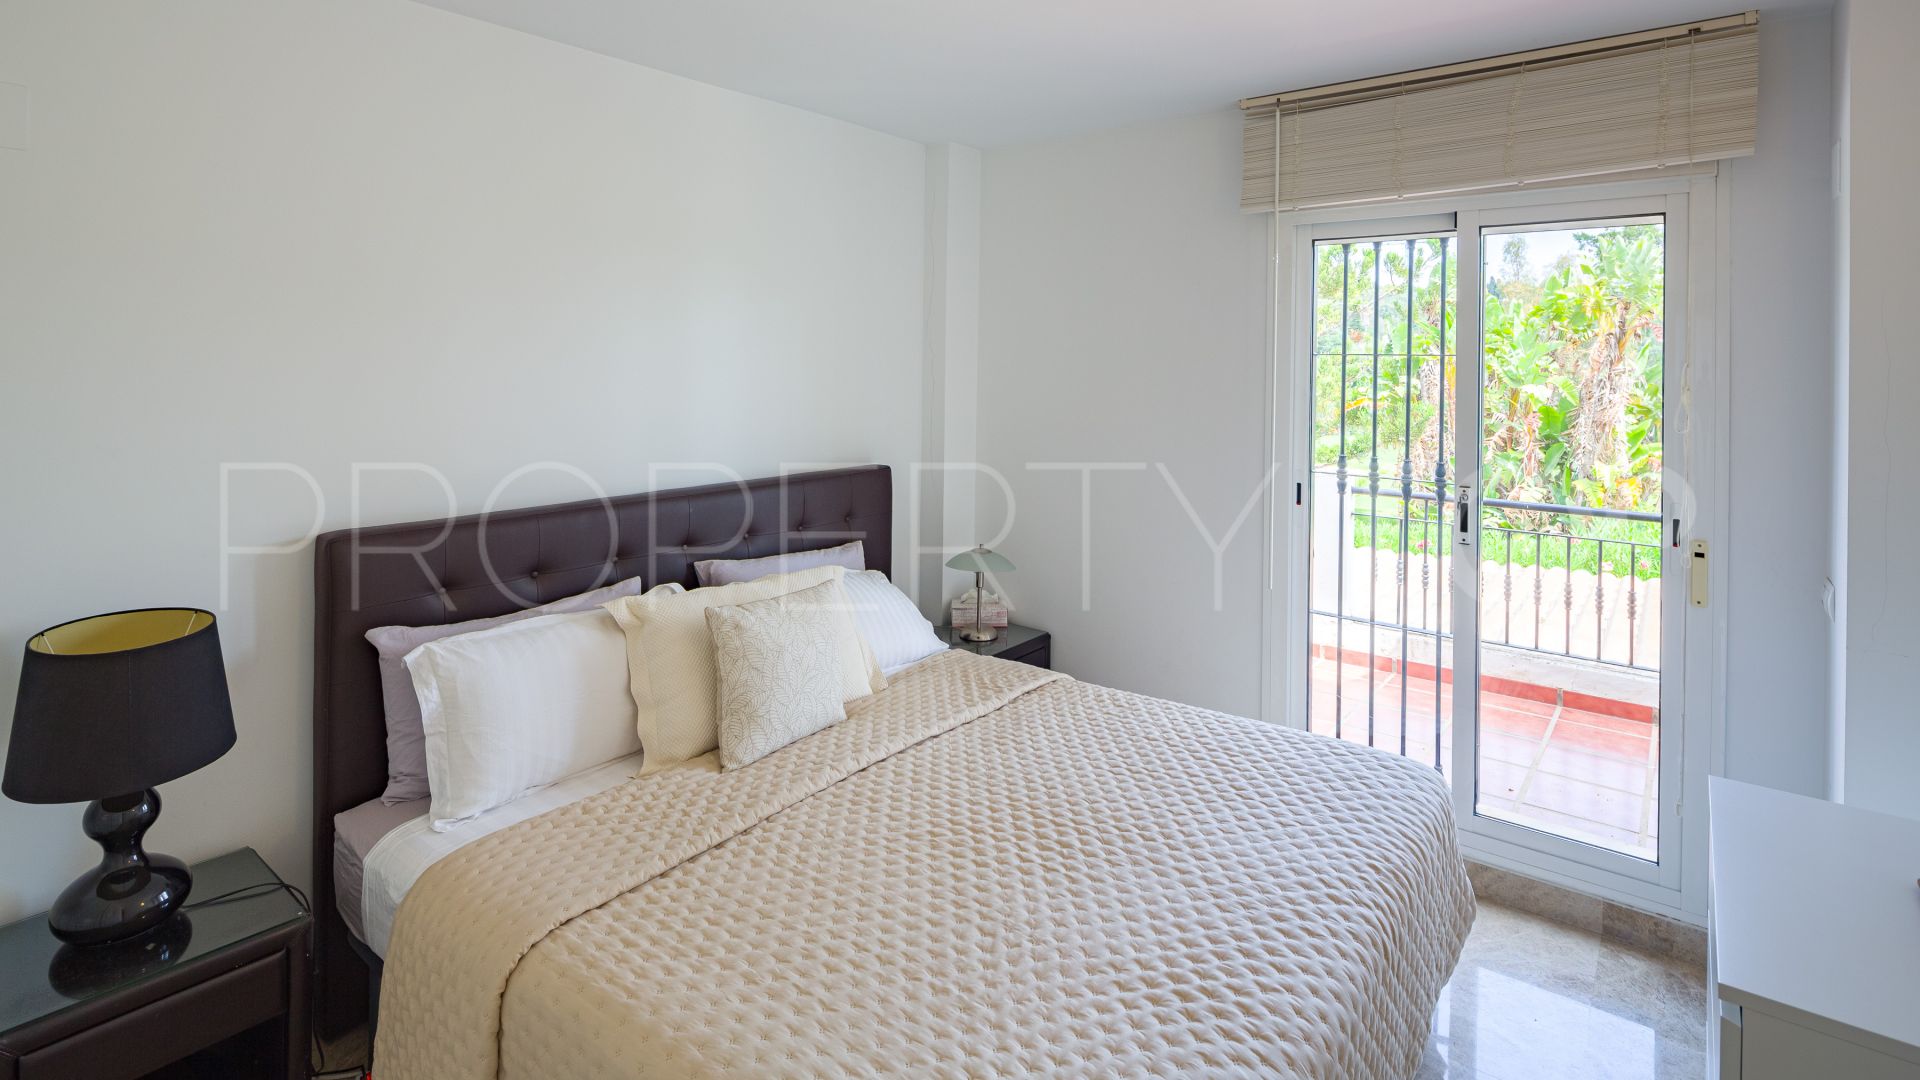 5 bedrooms semi detached house in Los Naranjos for sale